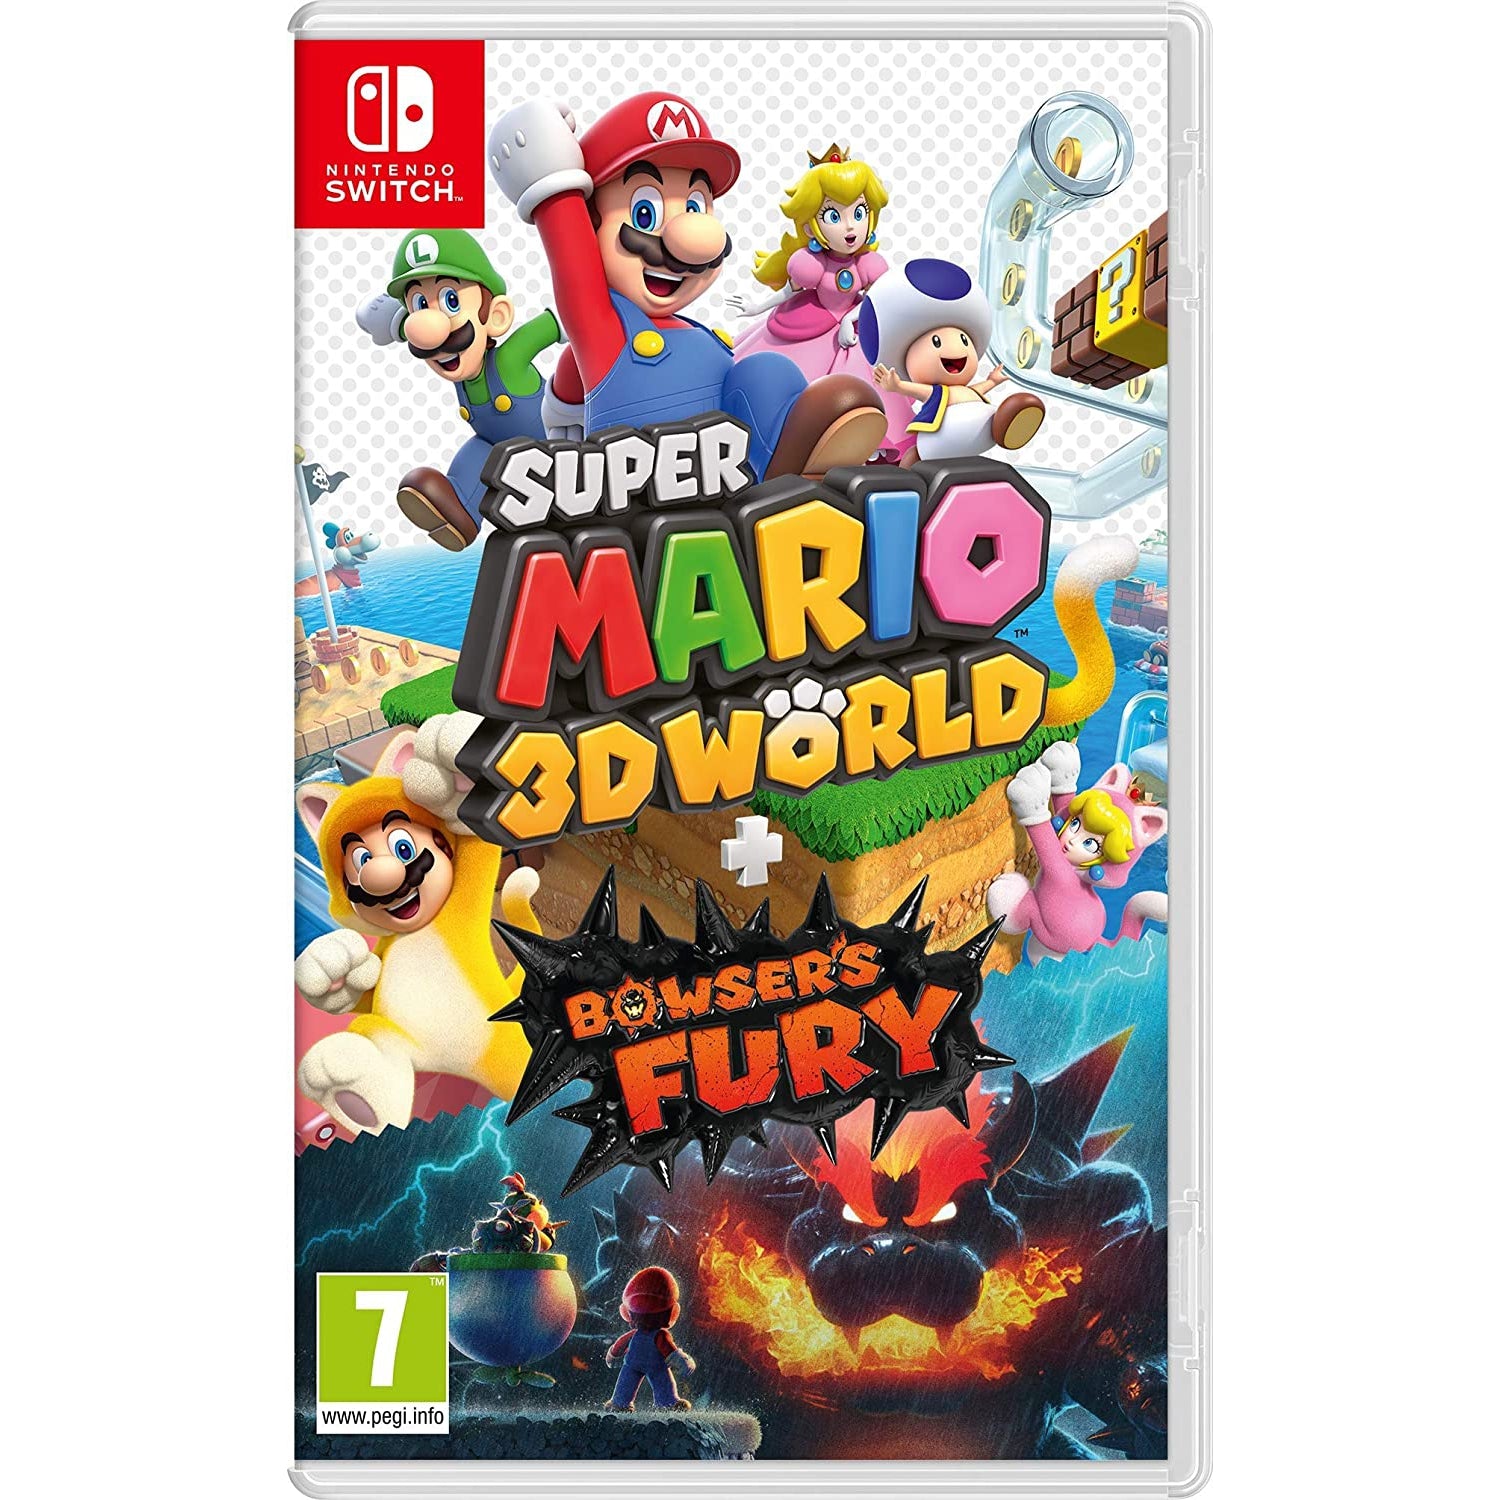 Super Mario 3D Worlds + Bowsers Fury (Nintendo Switch)